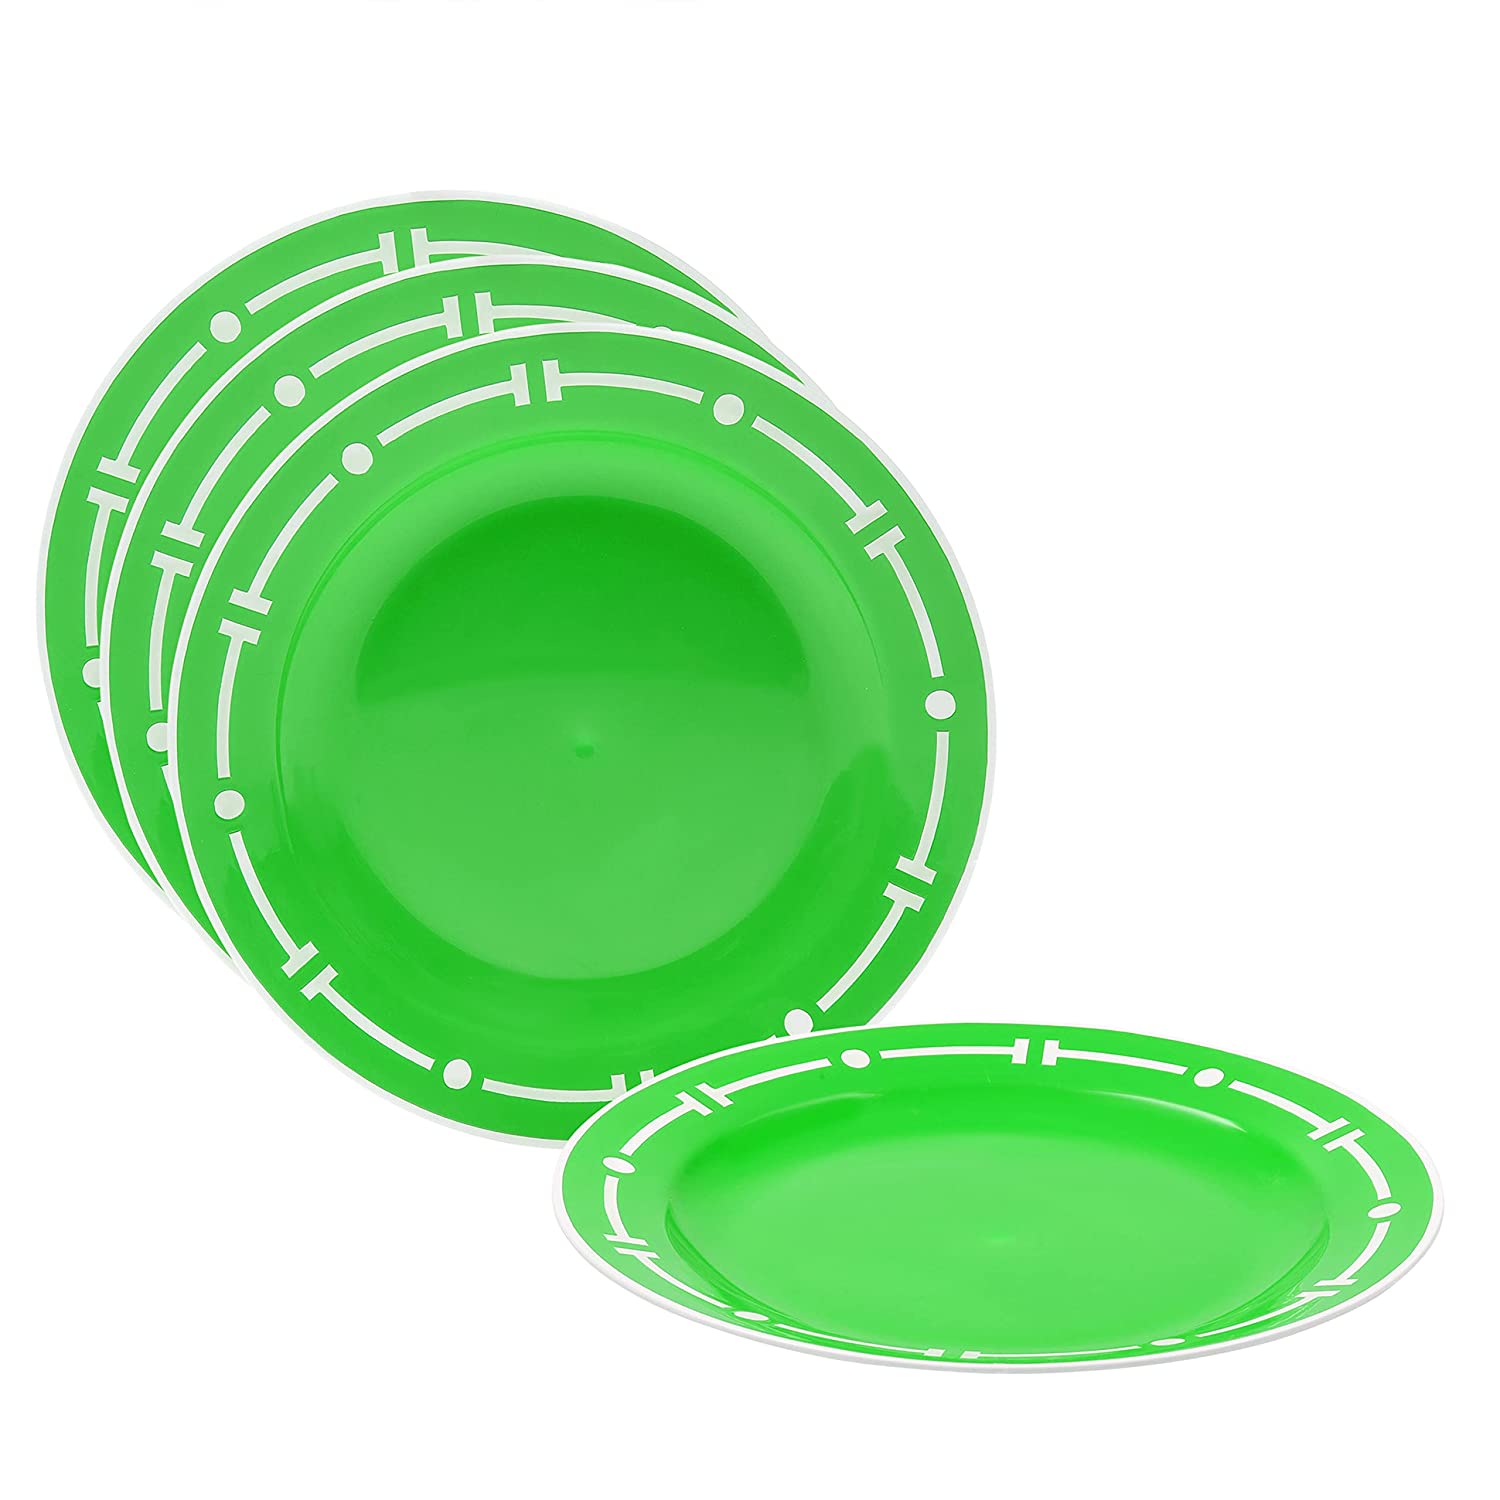 Cutting EDGE Round Double Colour Dinner Plates ,Unbreakable / Lightweight / Reusable / Dishwasher Safe / Lunch/Dinner/Bhojan/Thali Plates for Families, Kids Special, Daily Use & Parties, Regular Design Plates